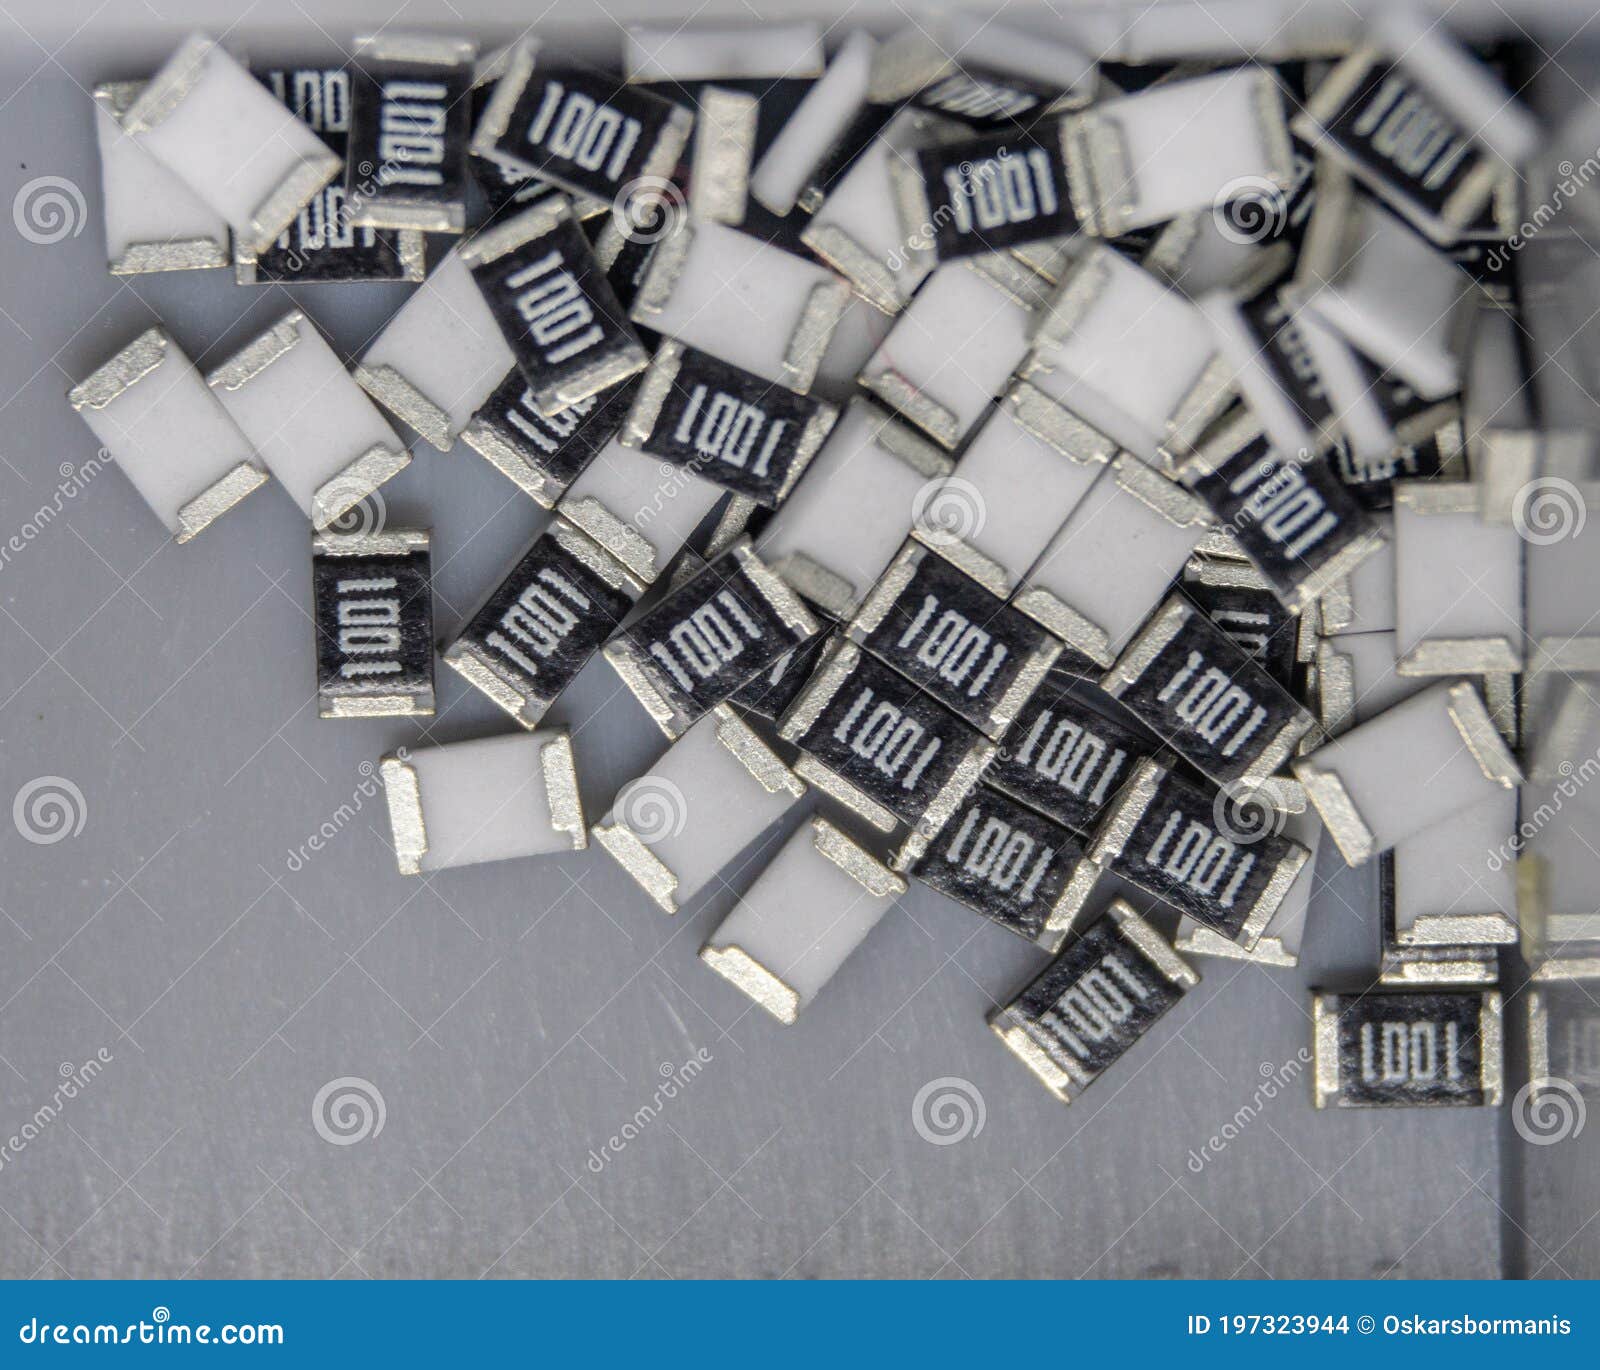 grey scattered microscopic smt surface mount chip resistors sorted in grey storage container